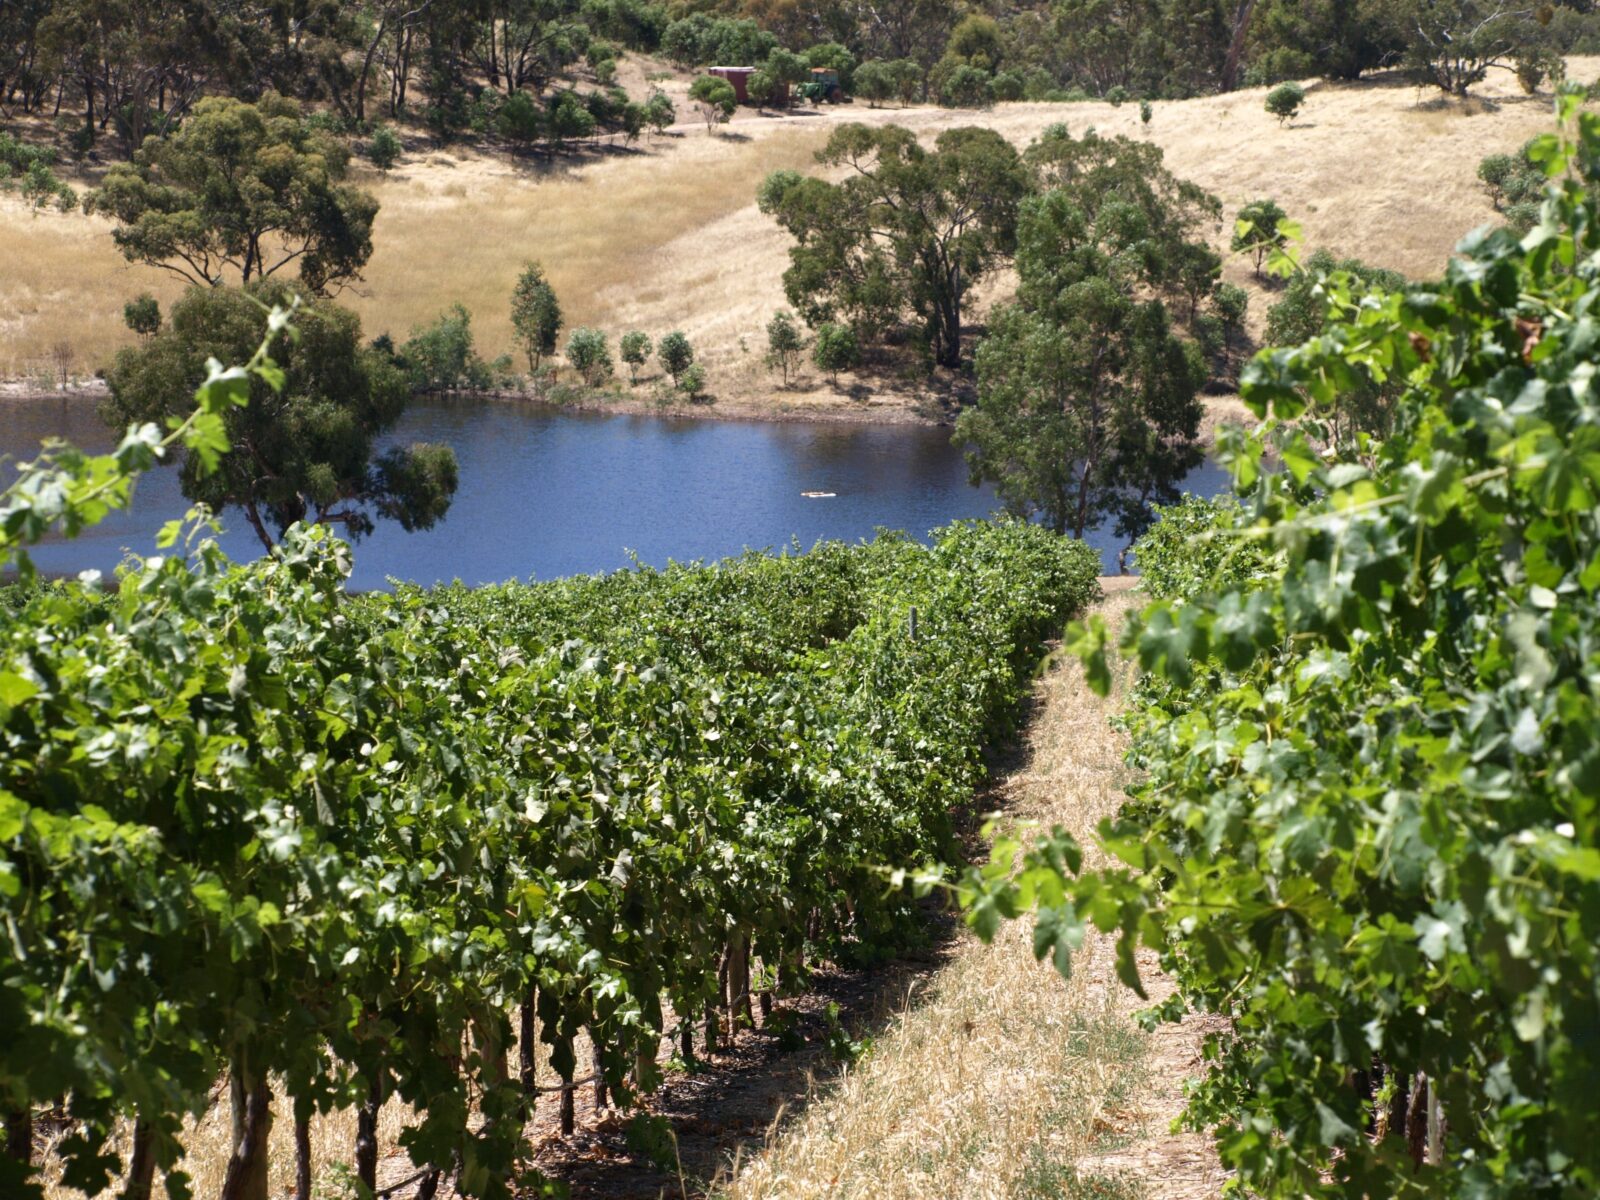 View of the vineyard and dam